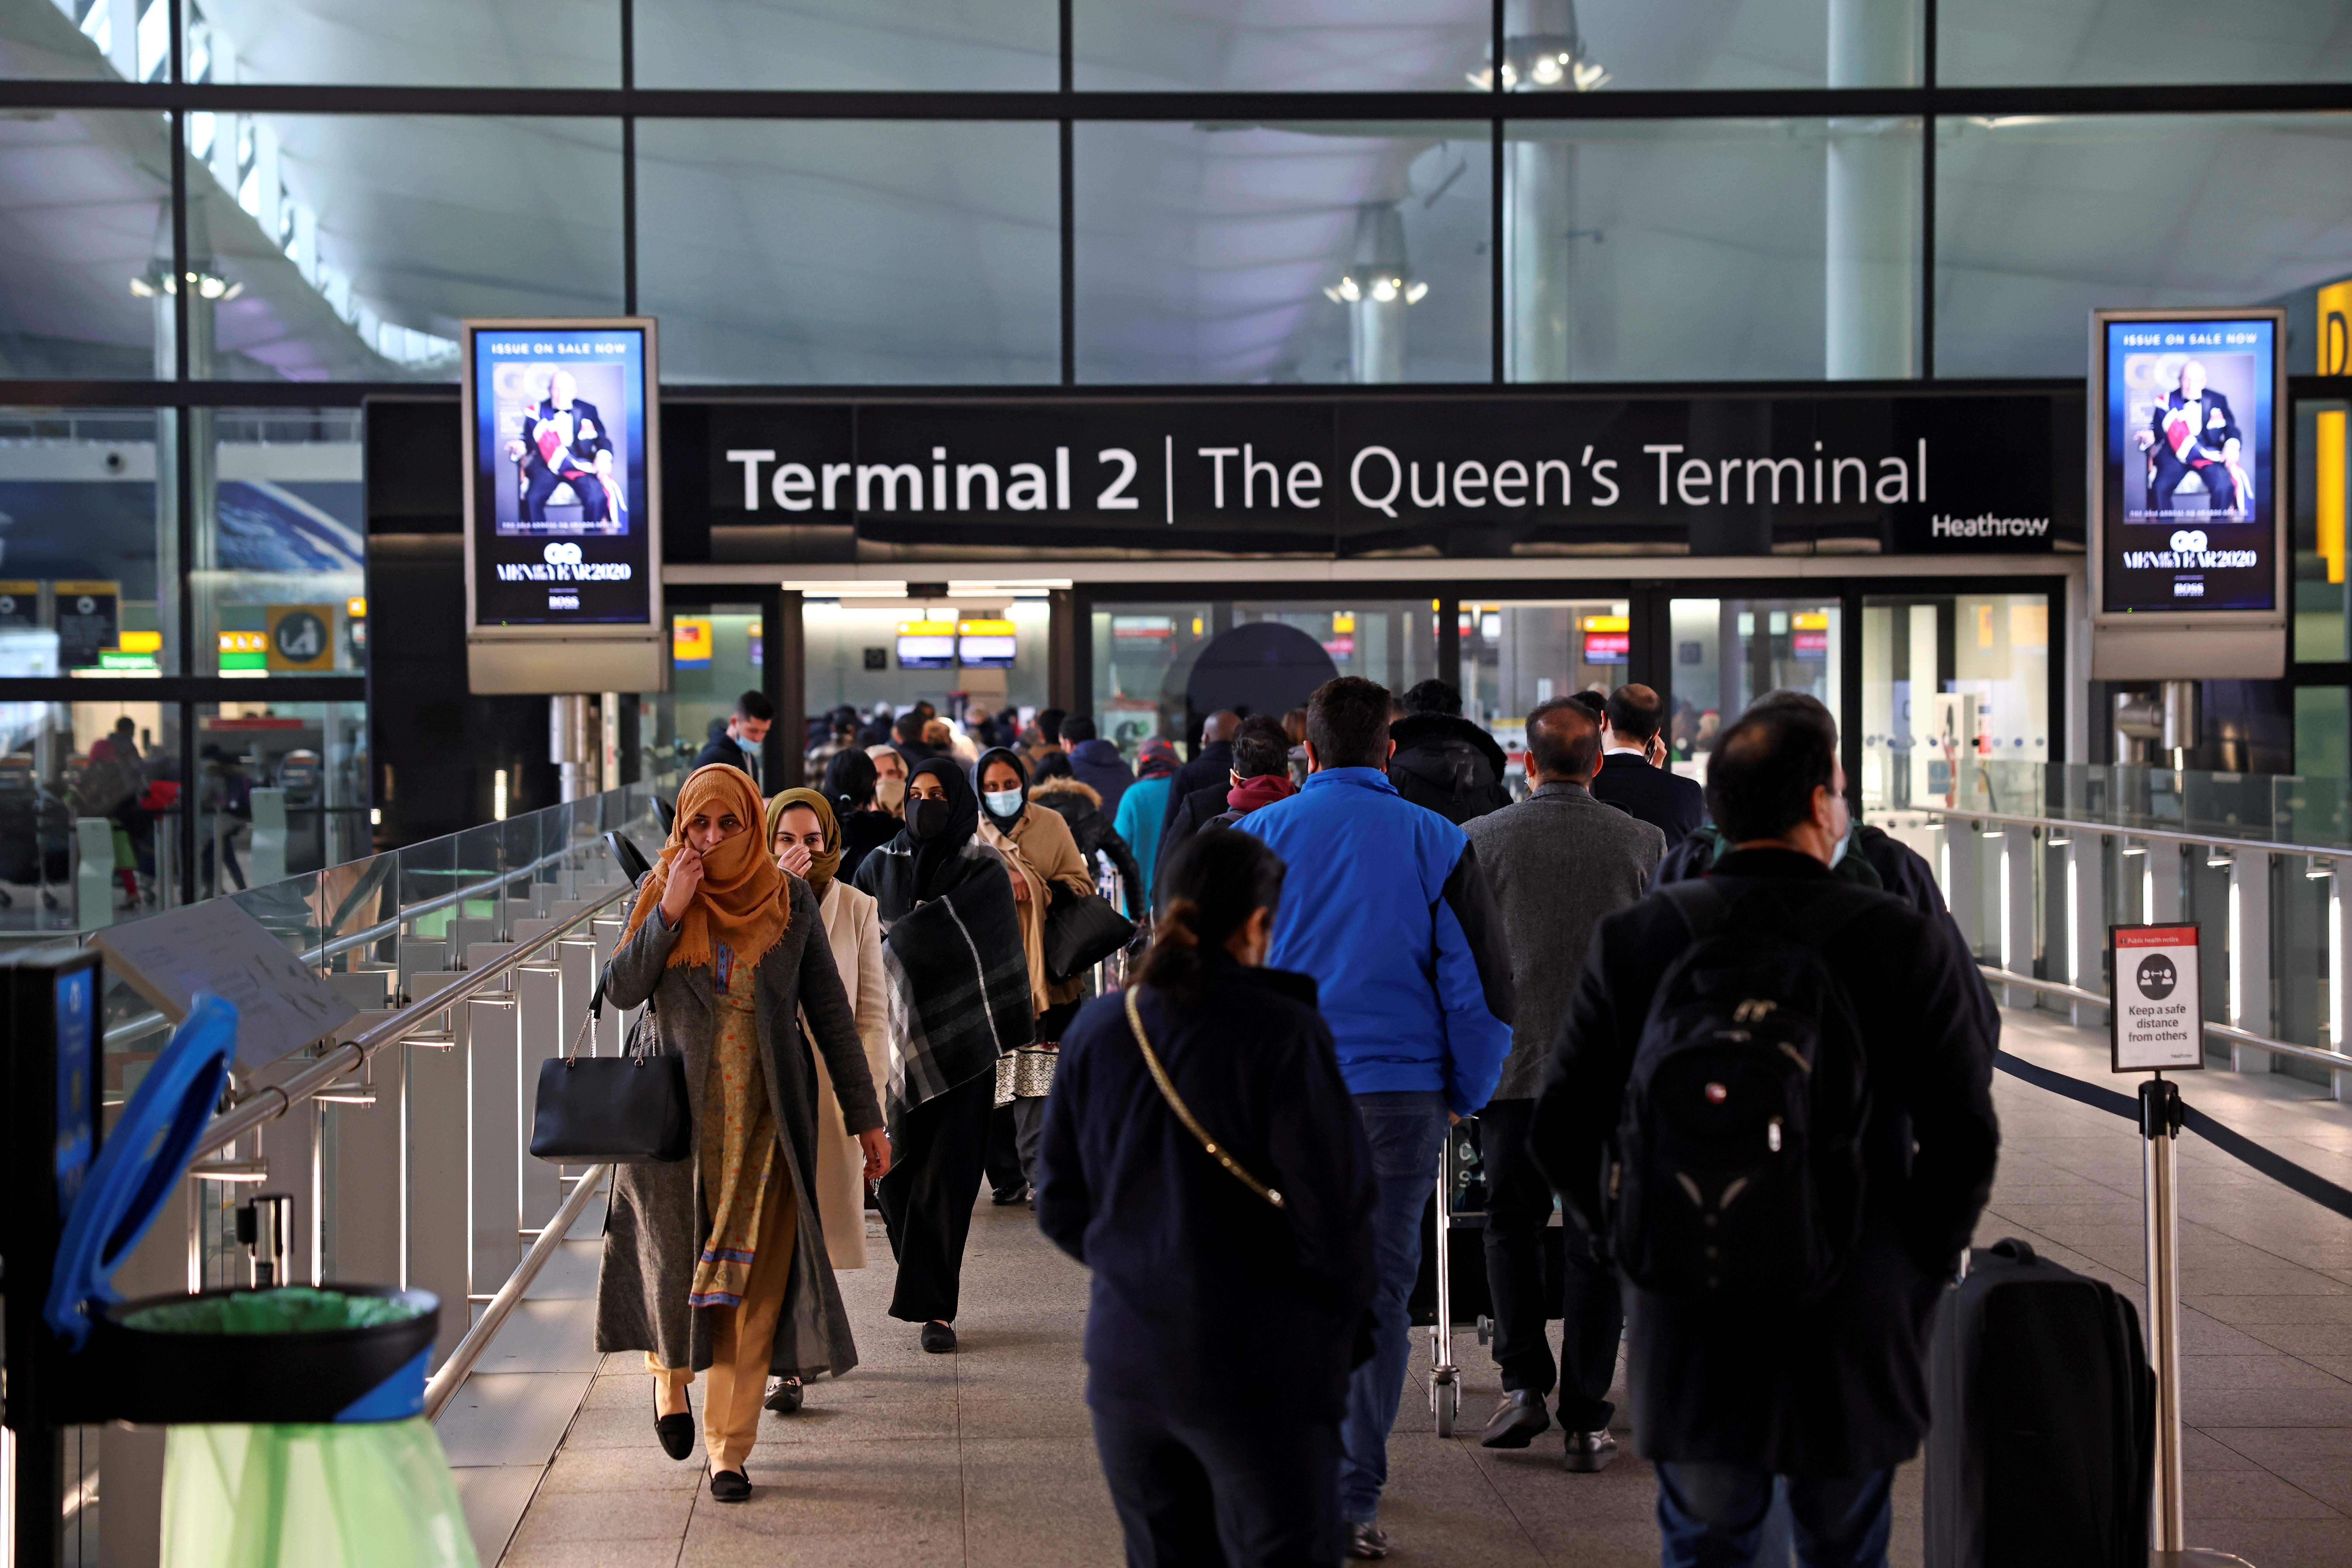 People queue to enter terminal 2, as tighter rules for international travellers start, at Heathrow Airport, amid the spread of the coronavirus disease (COVID-19) pandemic, London, Britain, January 18, 2021. REUTERS/Henry Nicholls/File Photo